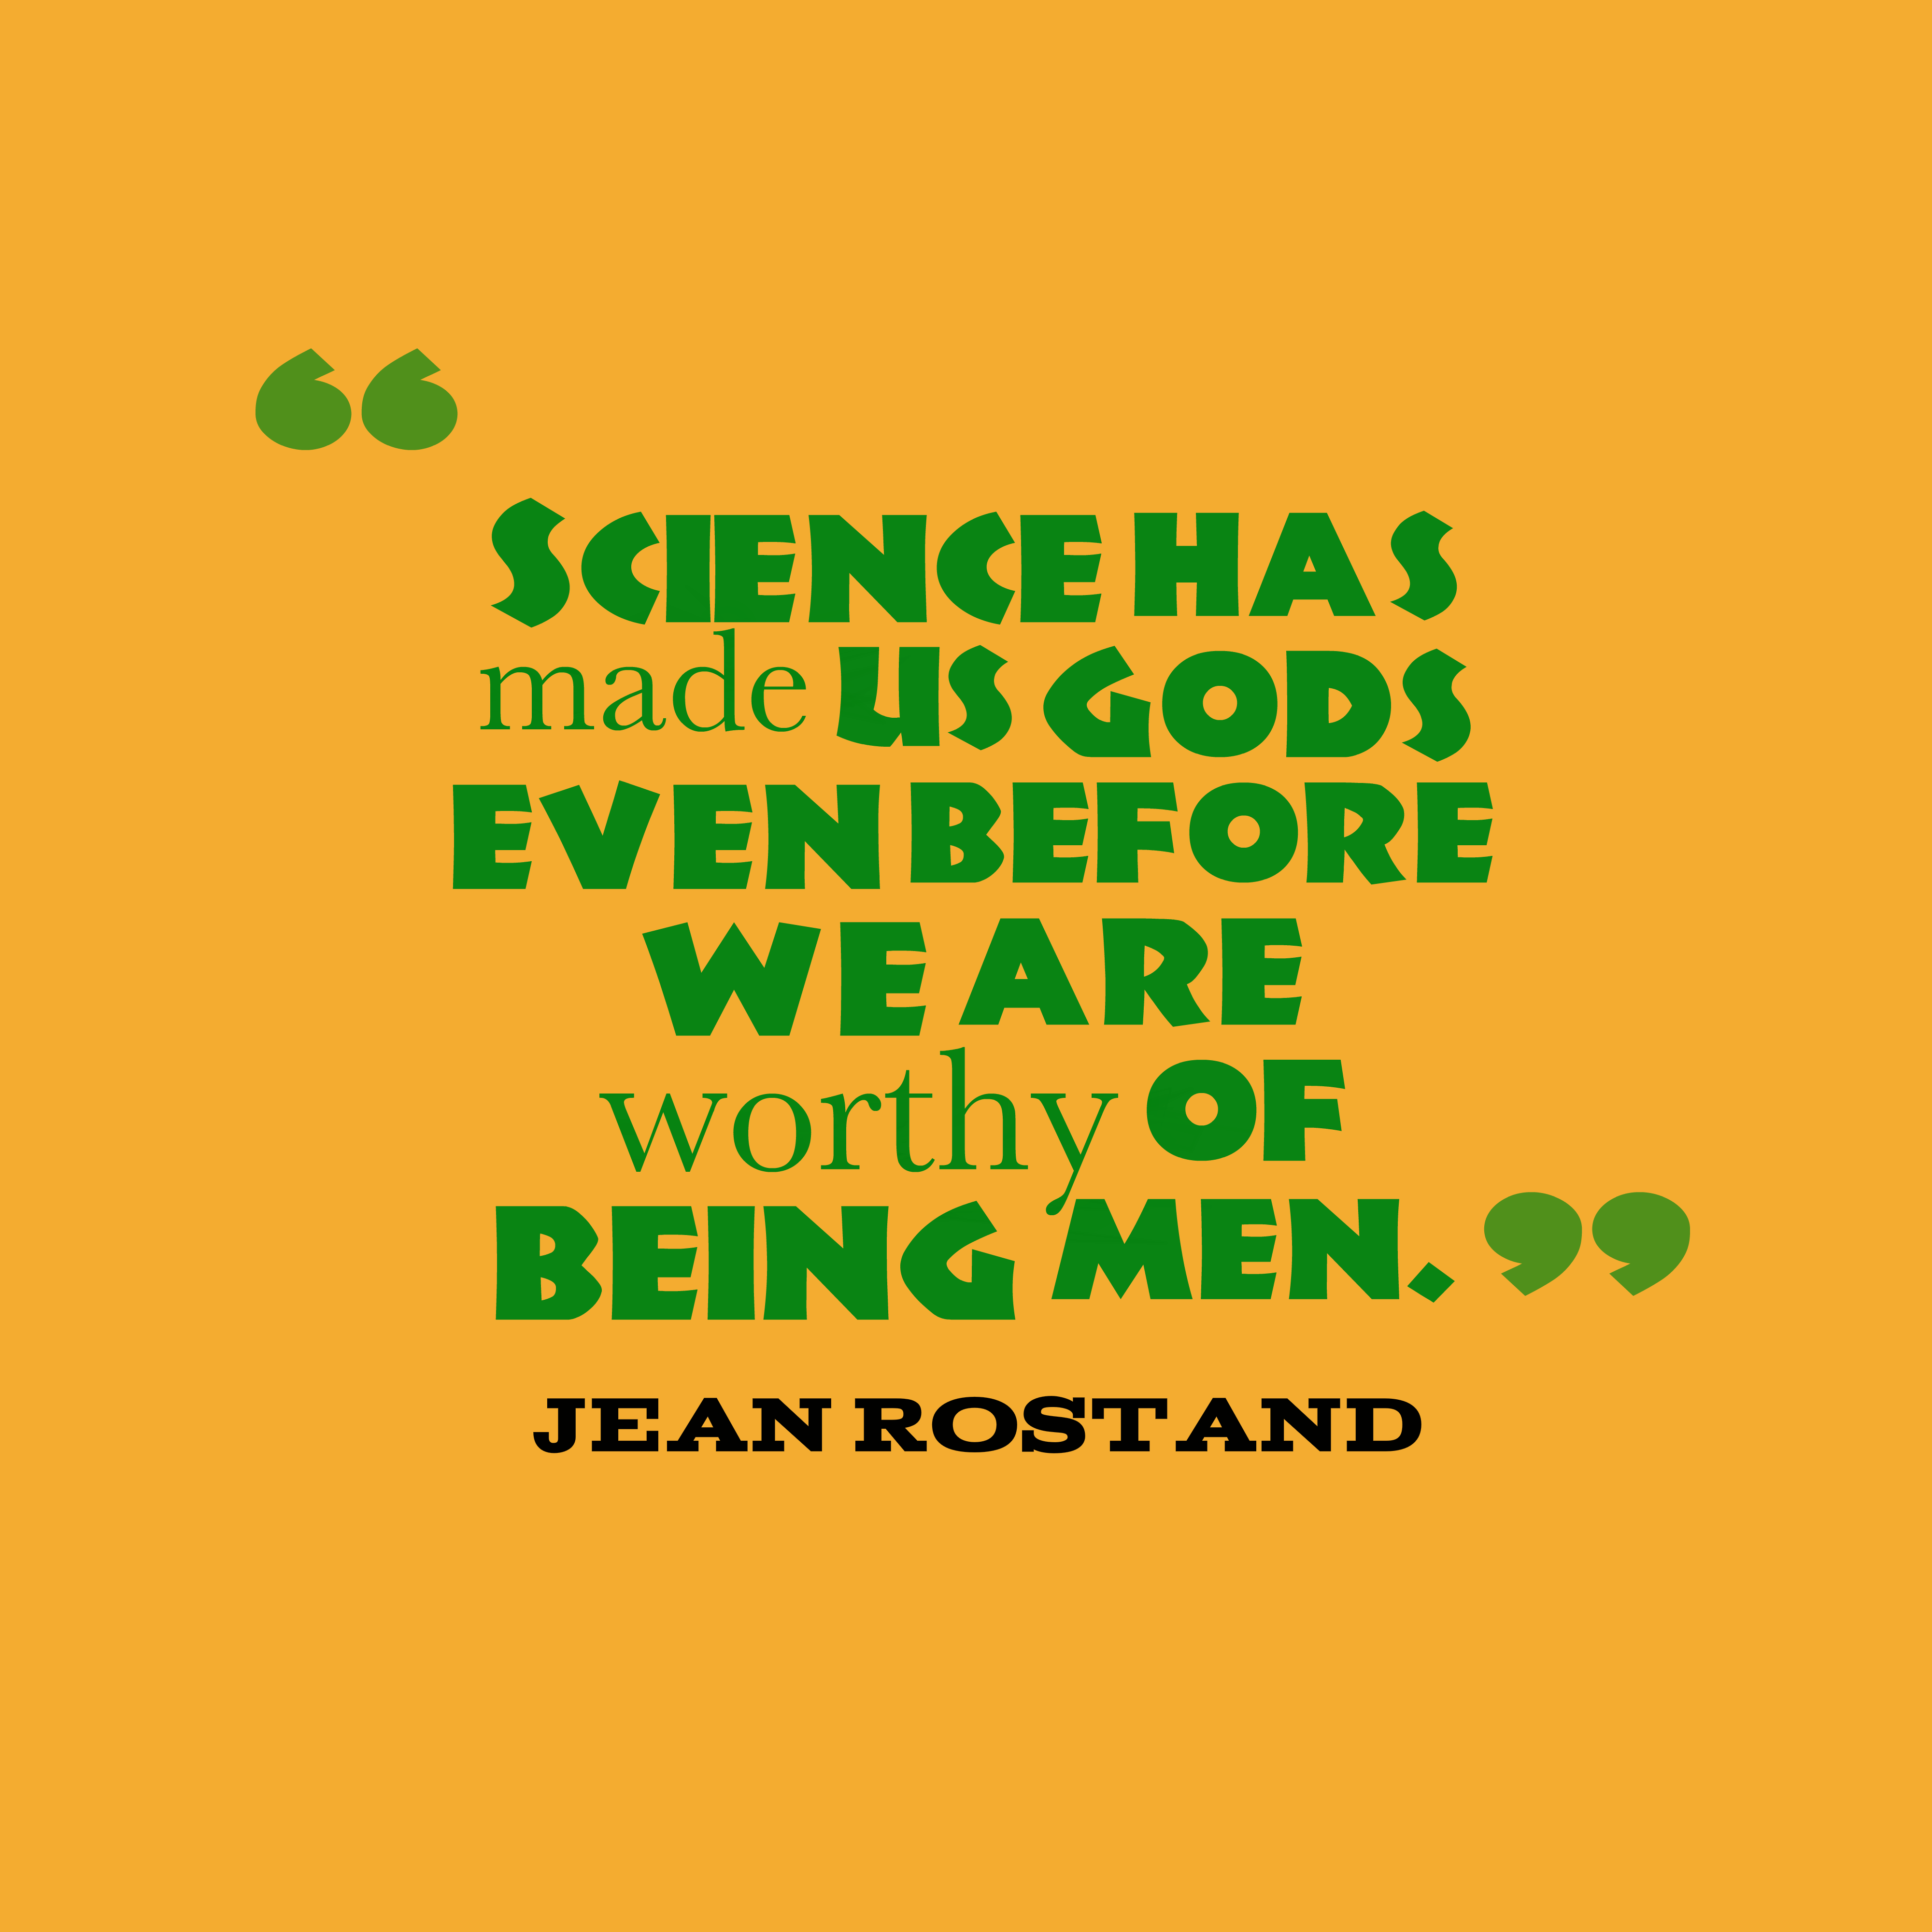 Science has made us gods even before we are worthy of being men. jean rostand